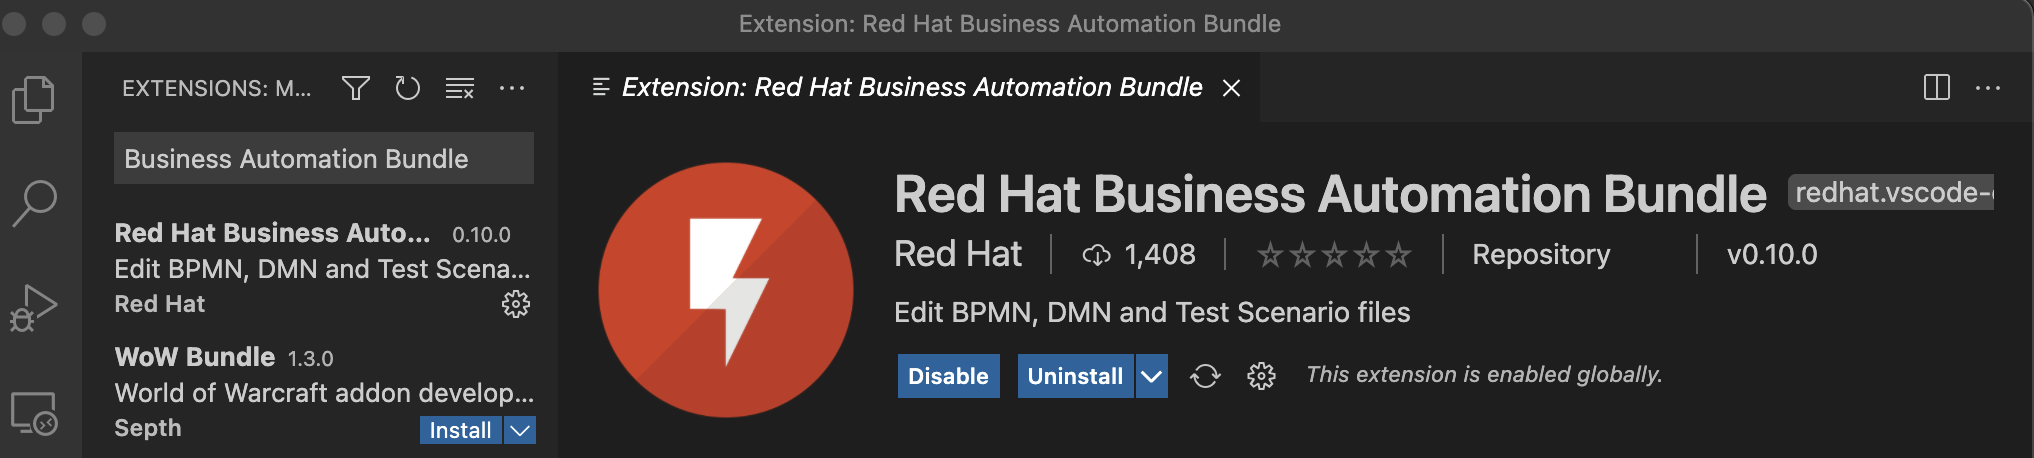 VSCode Red Hat Business Automation Bundle Extension